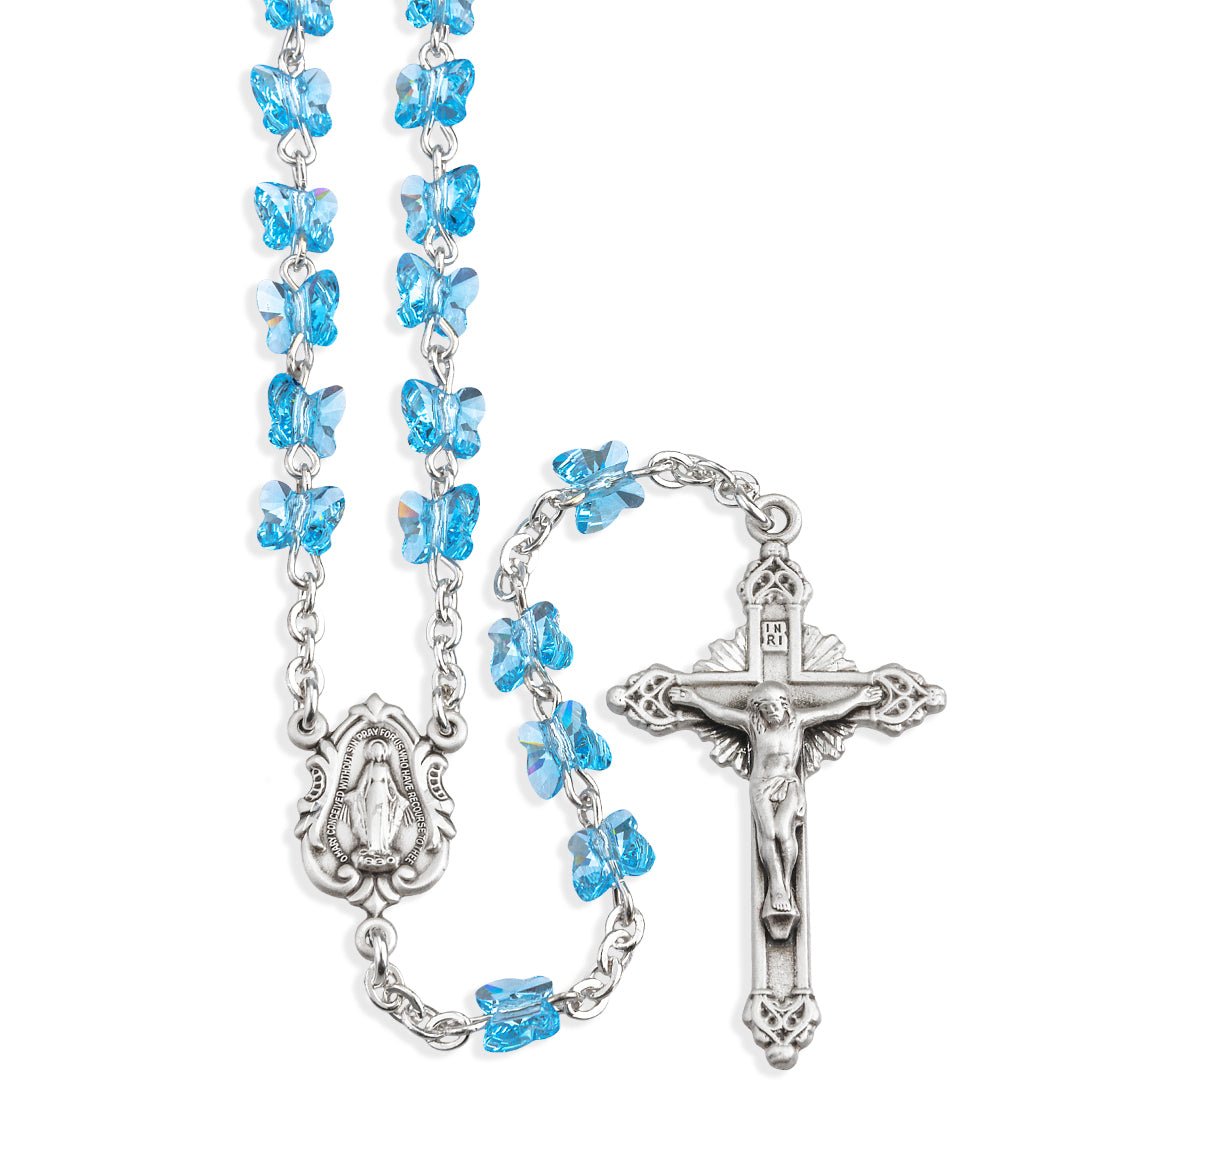 Rosary Sterling Crucifix and Centerpiece Created with Swarovski Crystal 6mm Butterfly Beads in Aqua by HMH